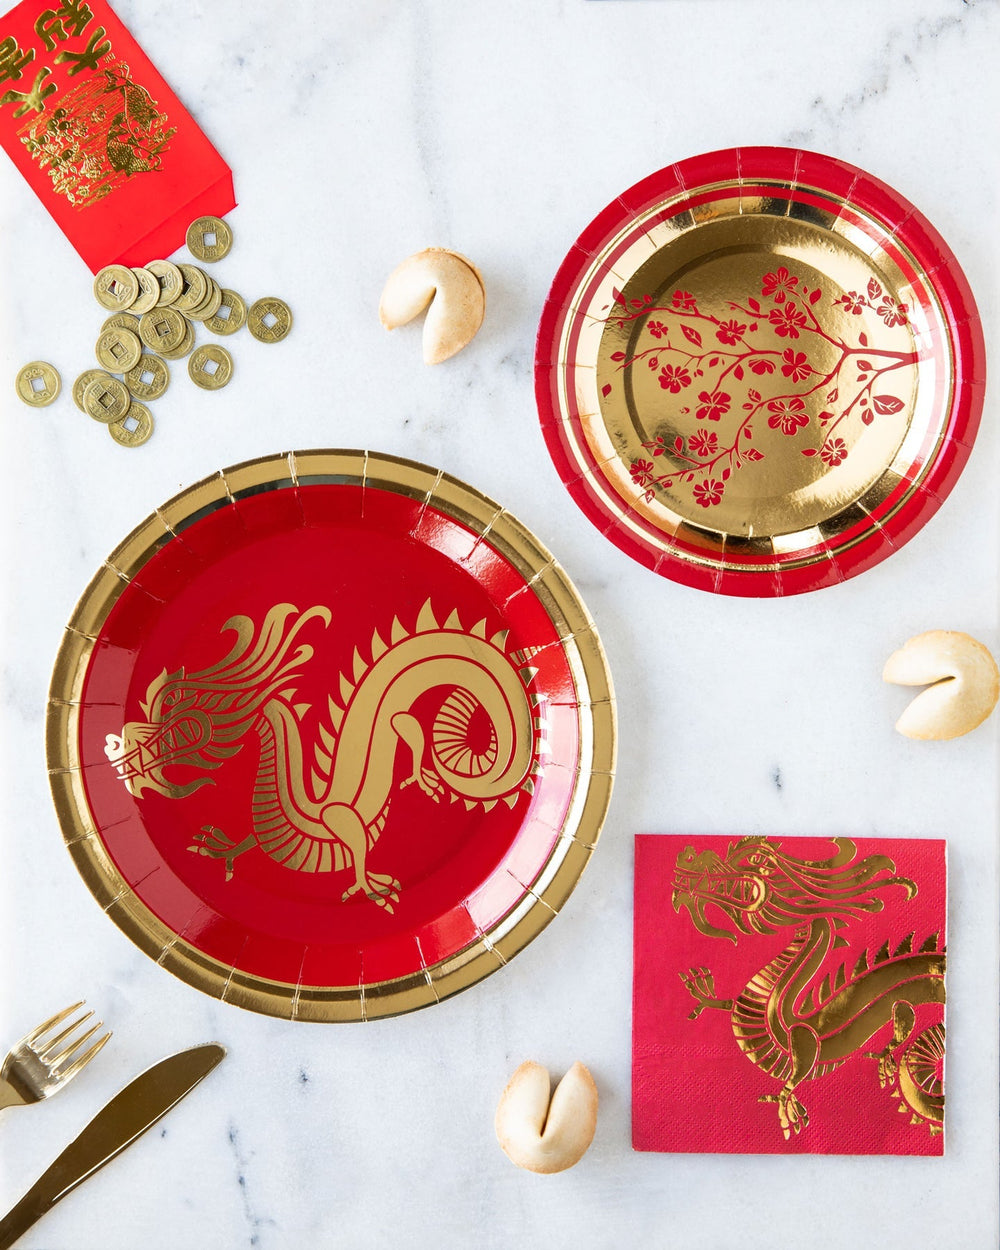 LUNAR NEW YEAR SMALL FLORAL PLATE My Mind’s Eye Lunar New Year Bonjour Fete - Party Supplies